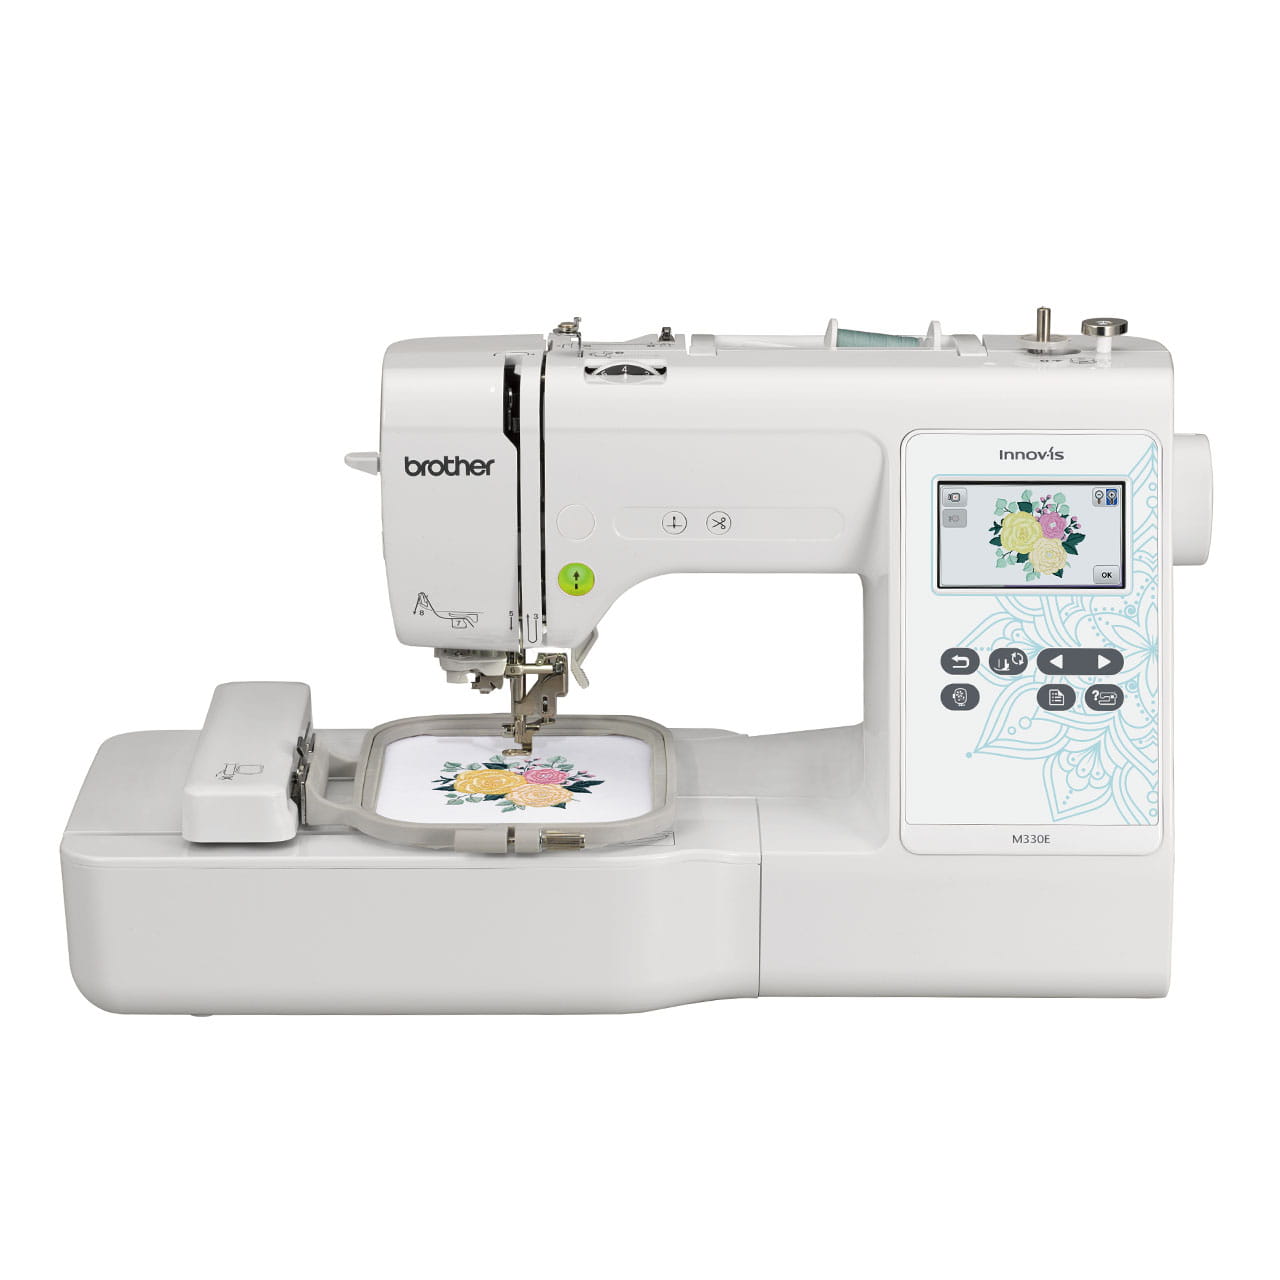 Brother Innov-is M330E Embroidery Machine Front View